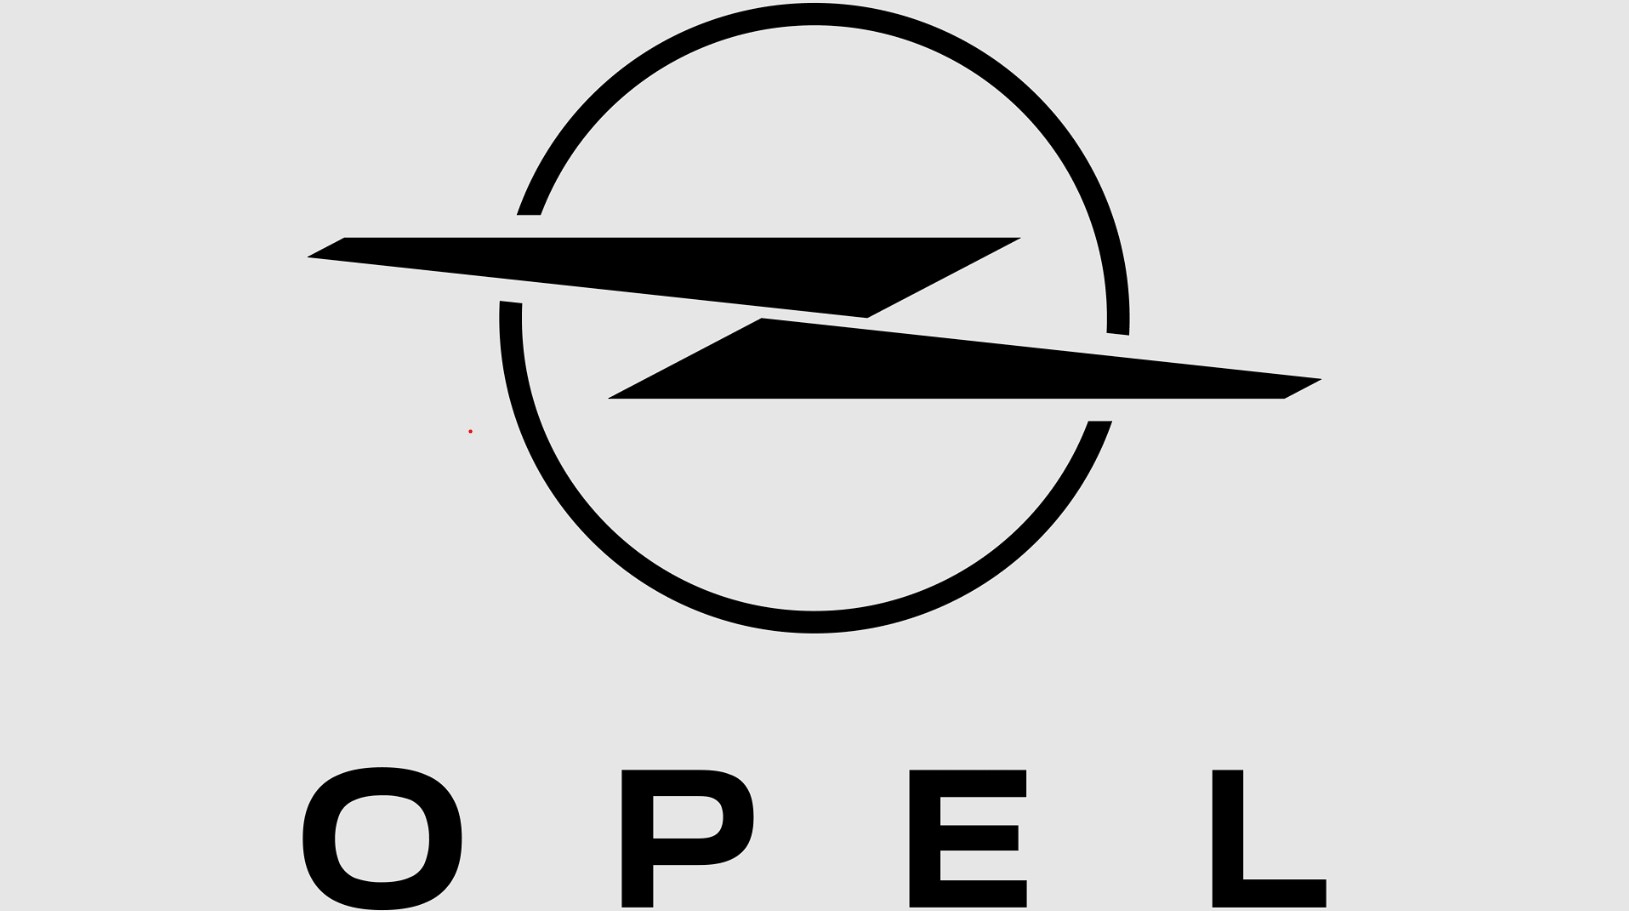 January 21, 1899: Opel Began Producing Automobiles 125 Years Ago